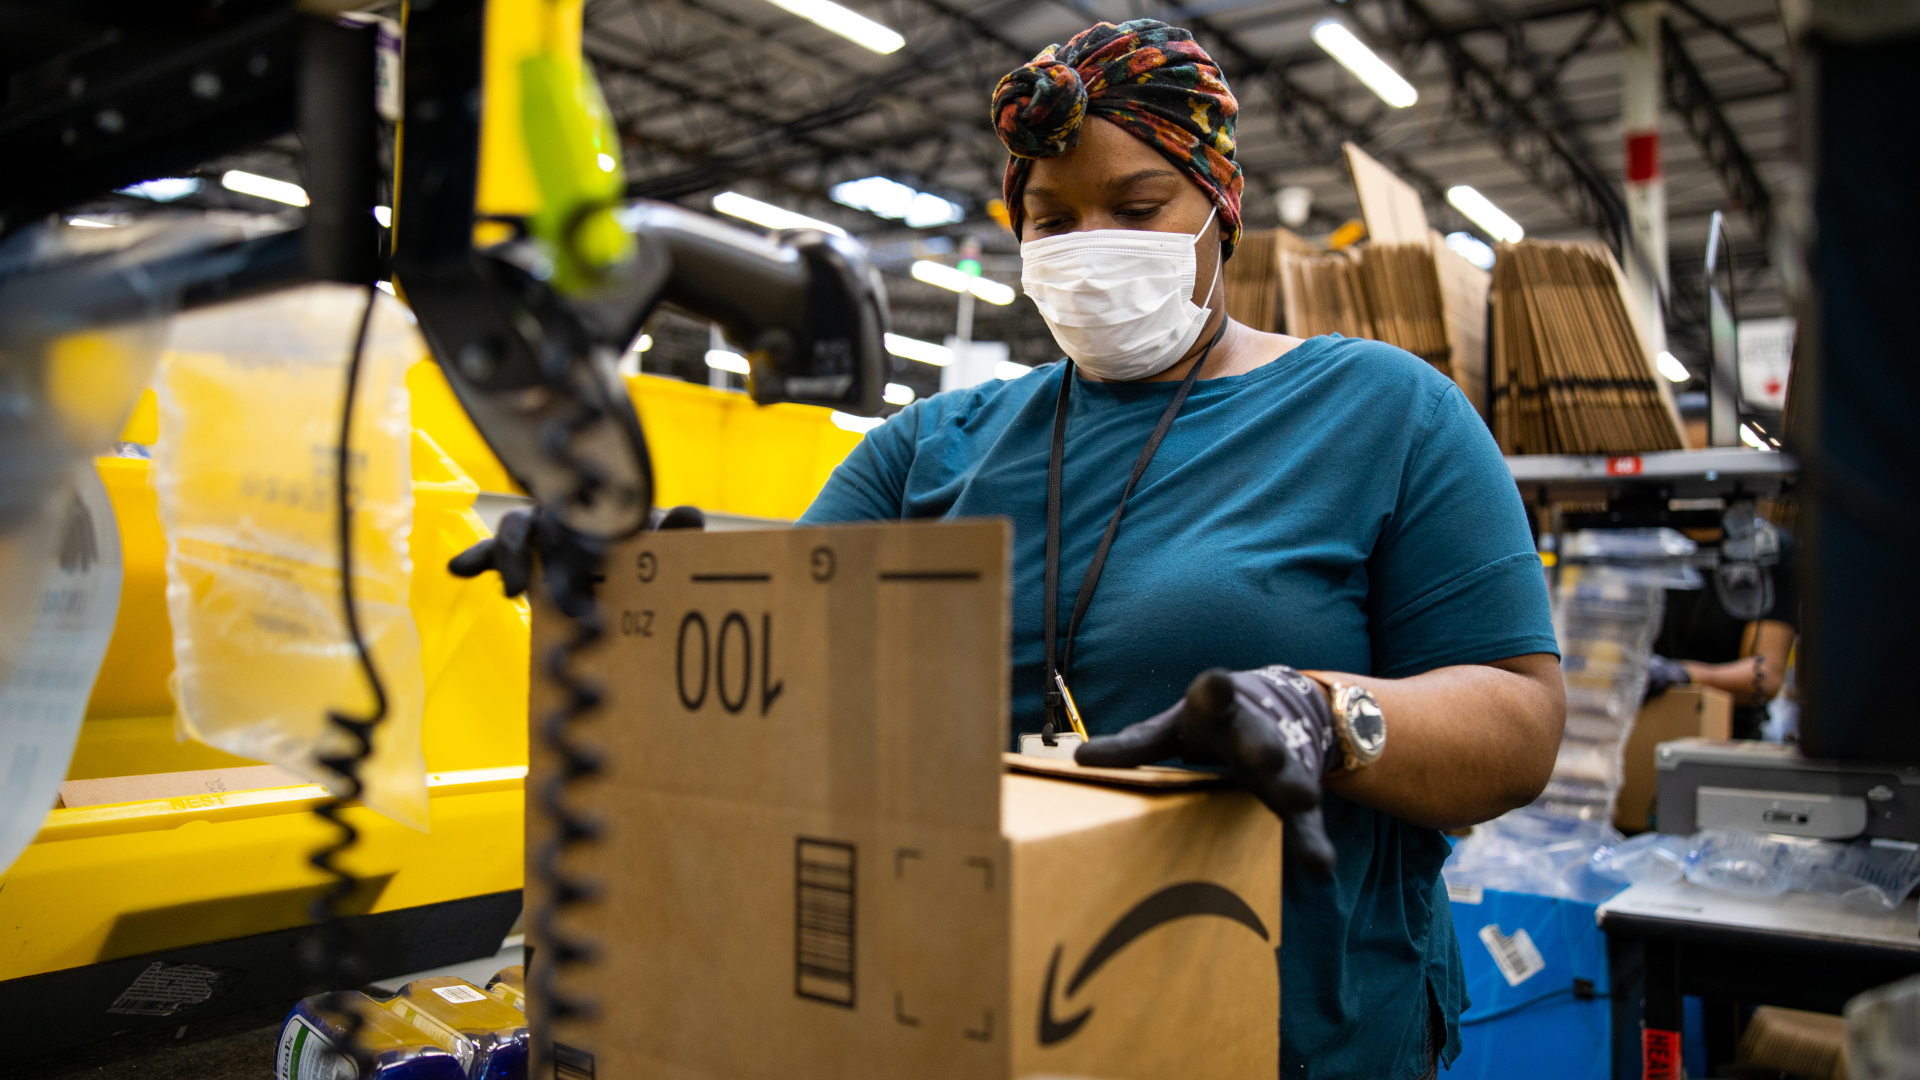 Amazon fulfillment center worker and robot